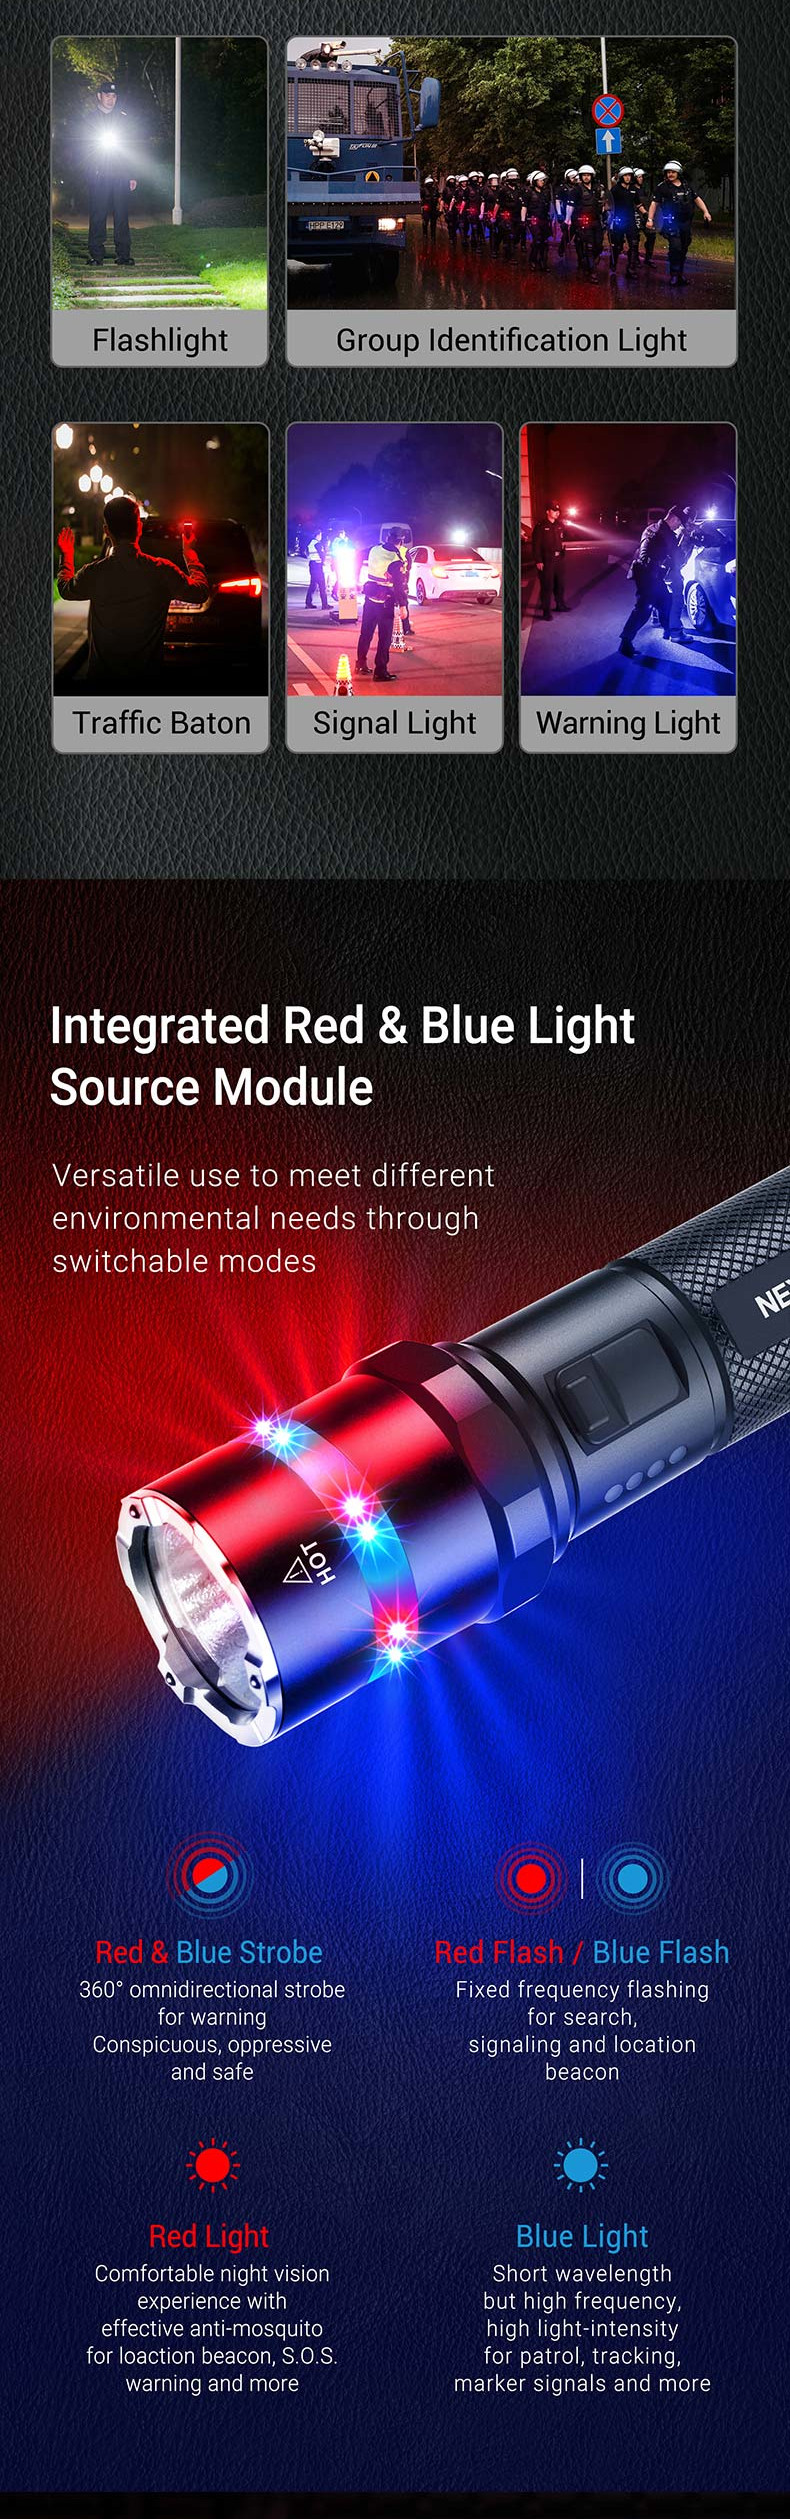 NEXTORCH-P83-Multi-light-Source-One-step-Strobe-Tactical-Flashlight-1300lm-280m-High-Output-18650-Ty-1959441-2